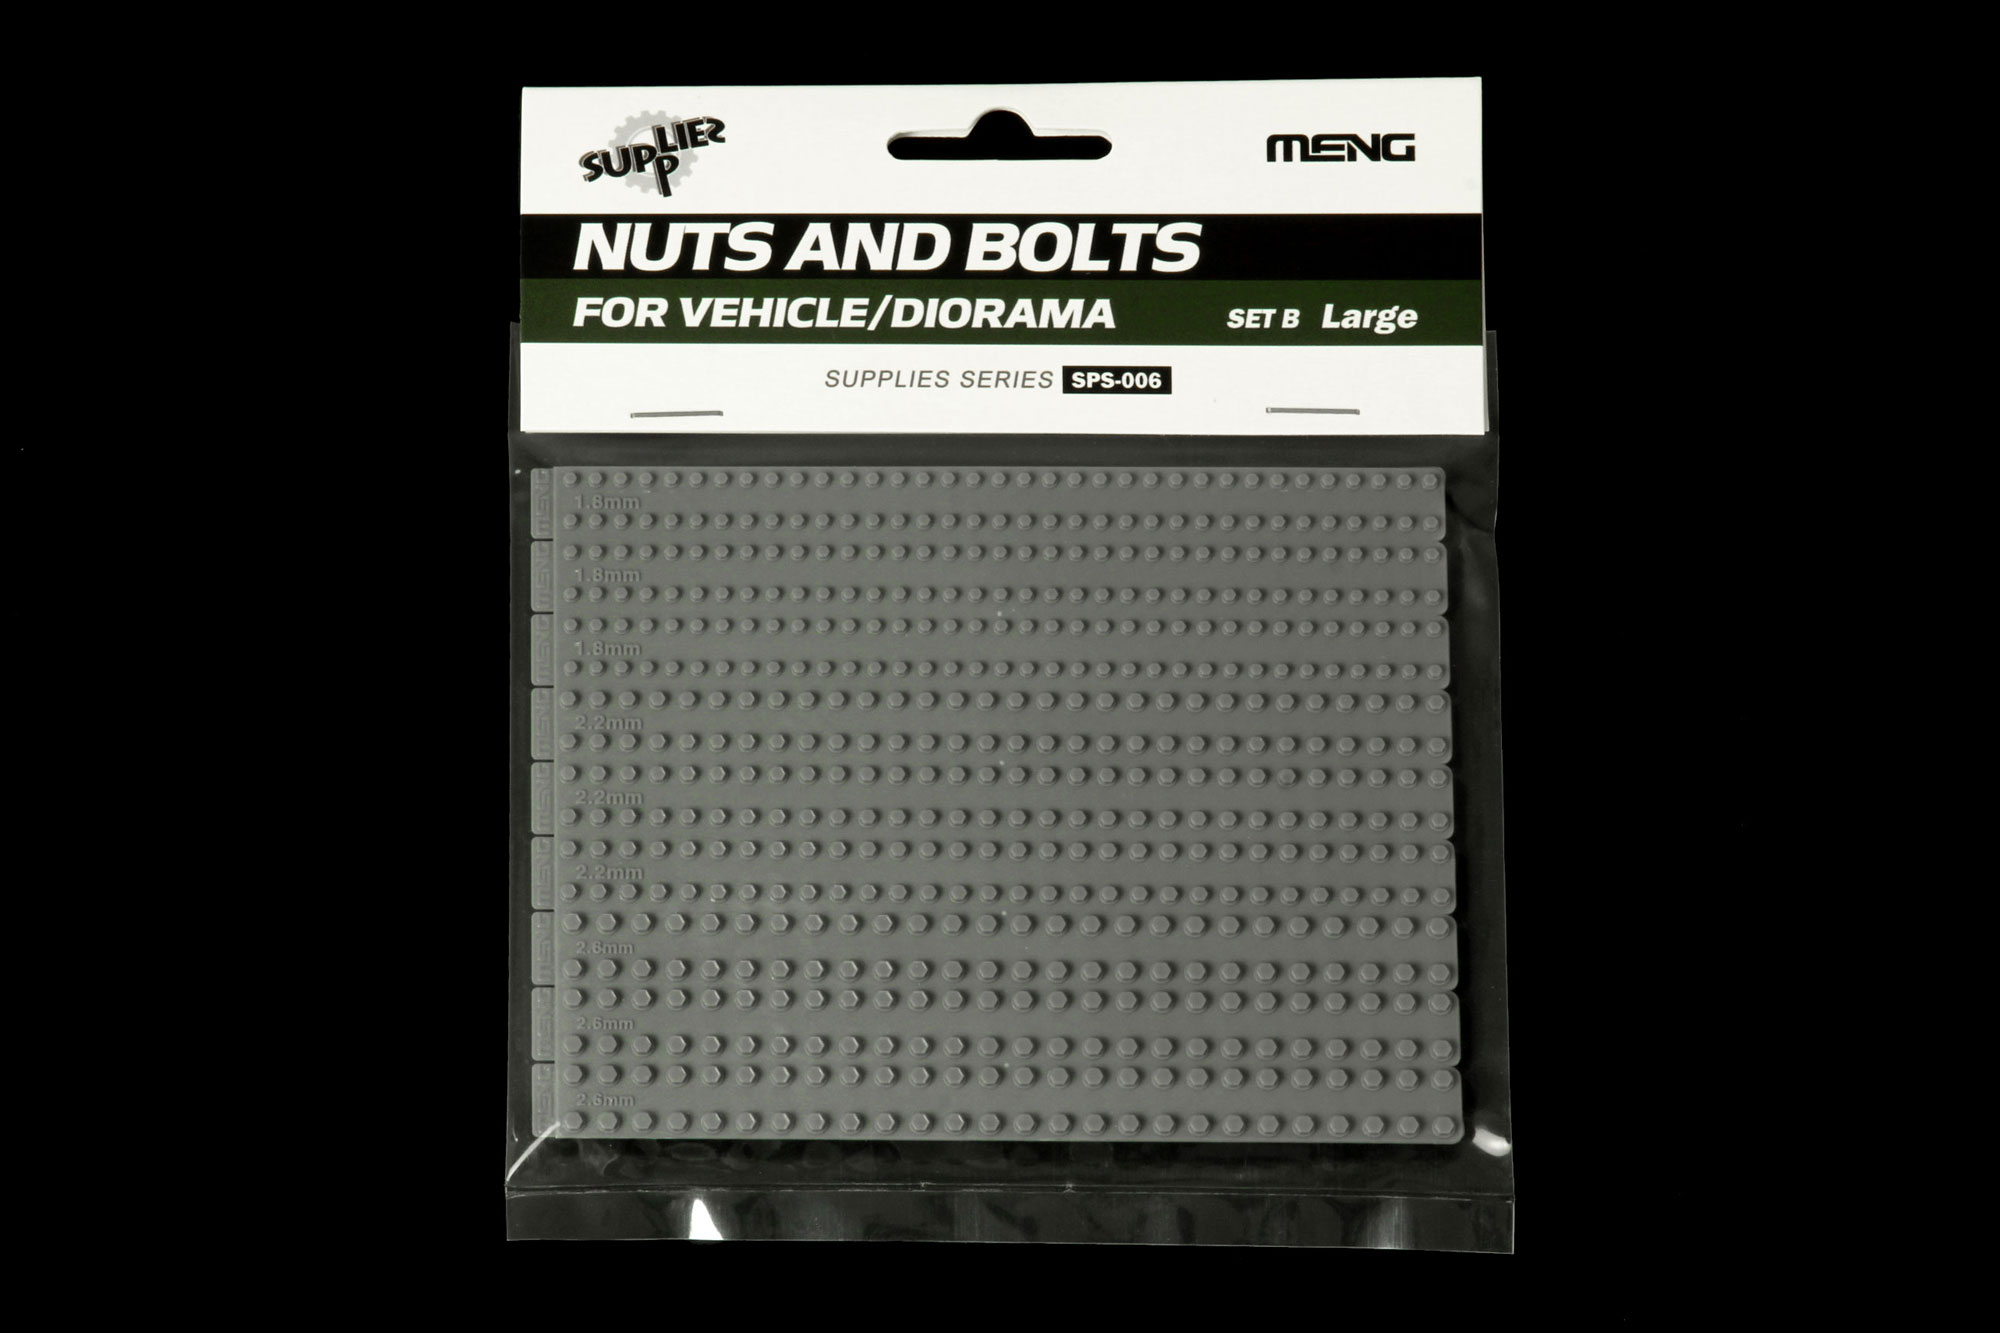 Nuts And Bolts For Vehicle/Diorama - Set B - Large